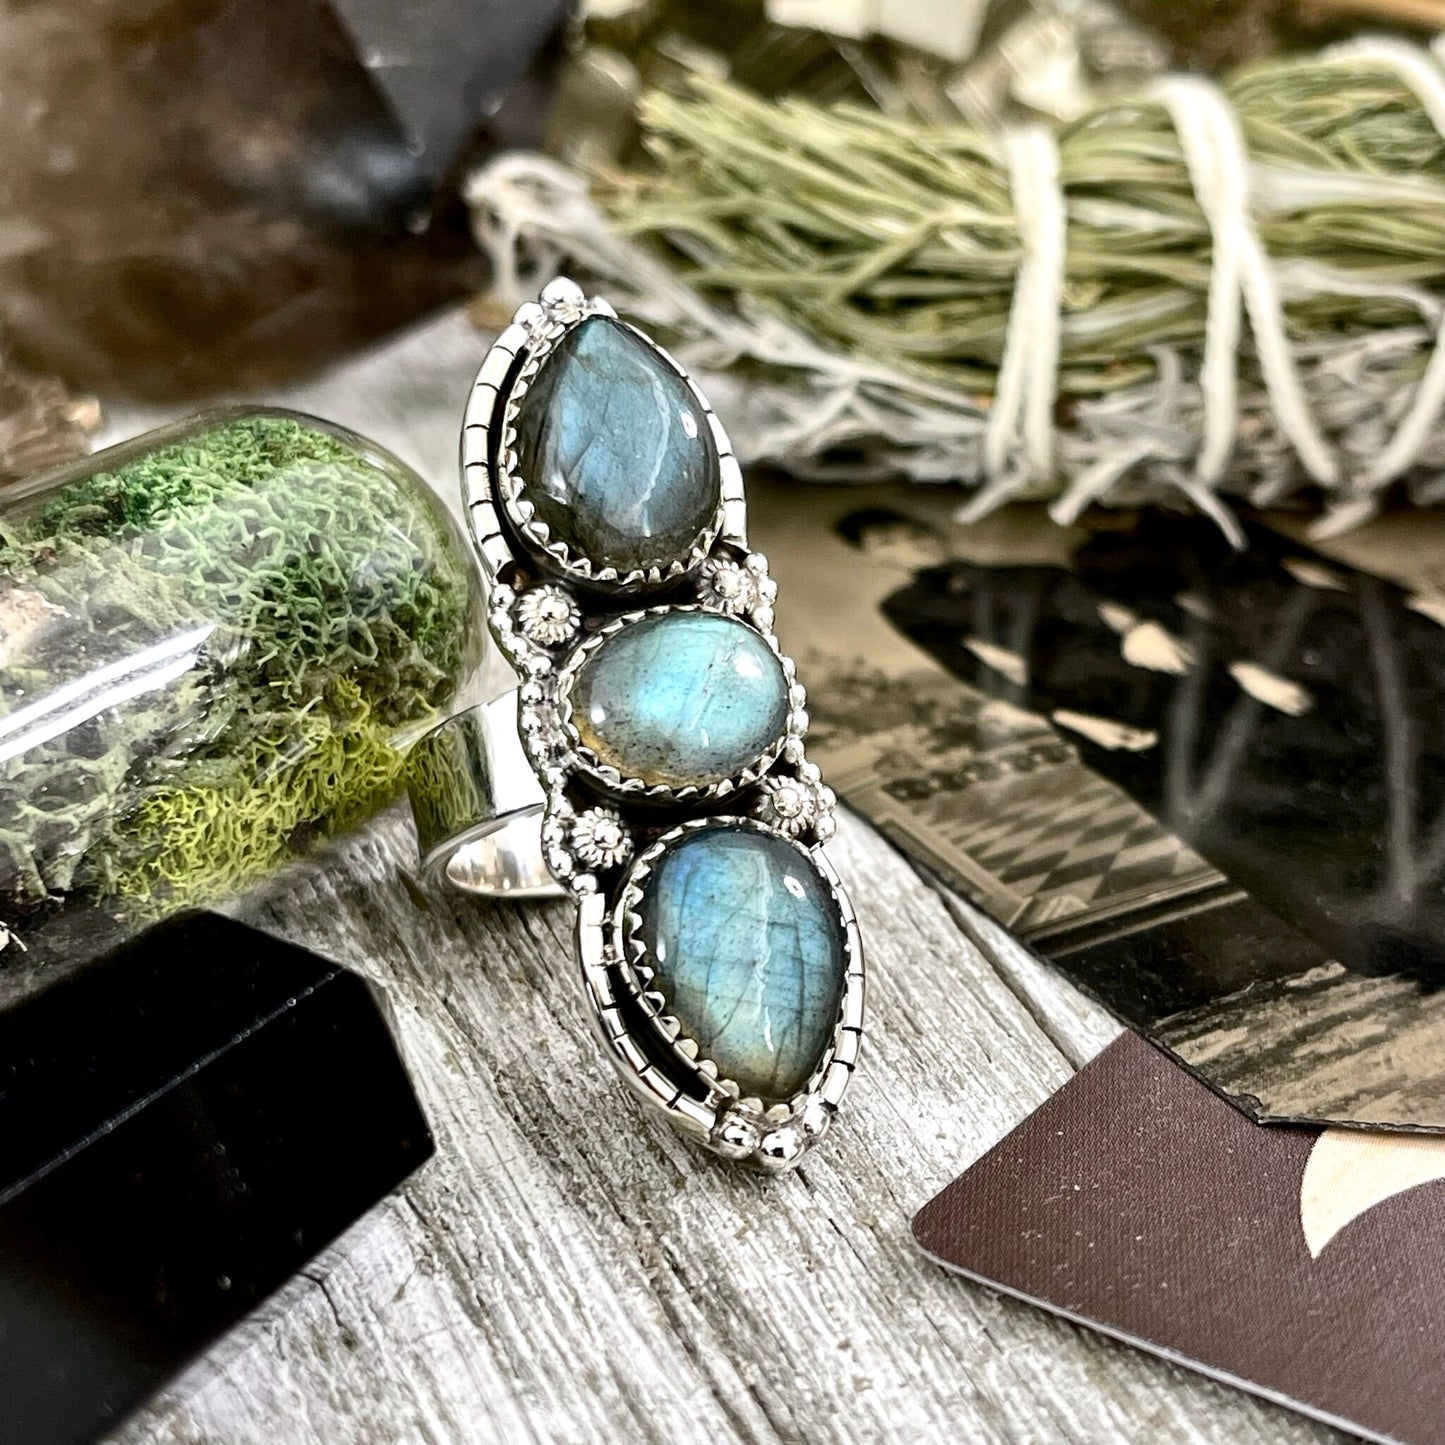 3 Stone Ring, Big Stone Ring, Bohemian Ring, Boho Jewelry, Boho Ring, Crystal Ring, Etsy Id 1143395447, Festival Jewelry, Foxlark Alchemy, Foxlark- Rings, Gift For Woman, Gypsy Ring, Jewelry, Rings, Statement Rings, Wholesale